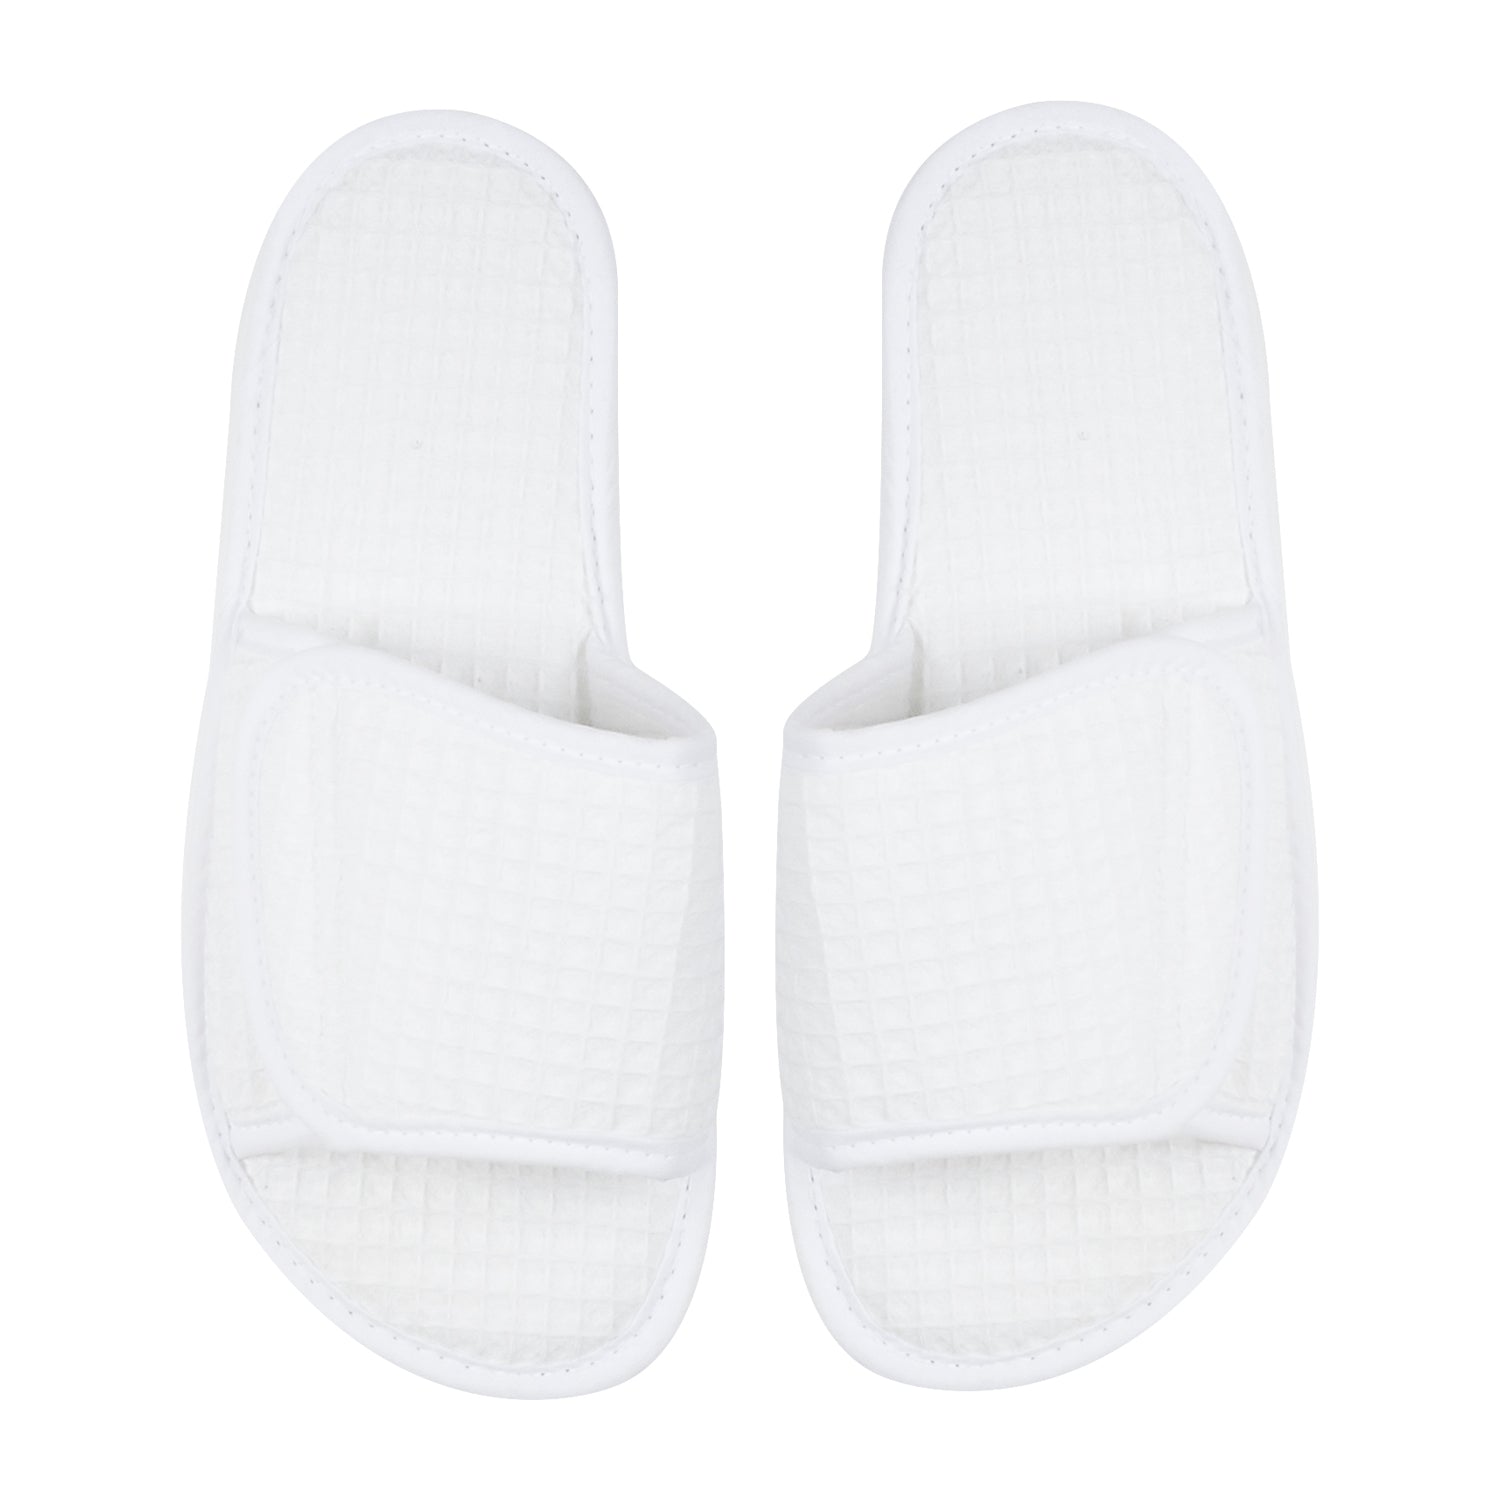 Waffle Weave Slippers - An Initial Impression